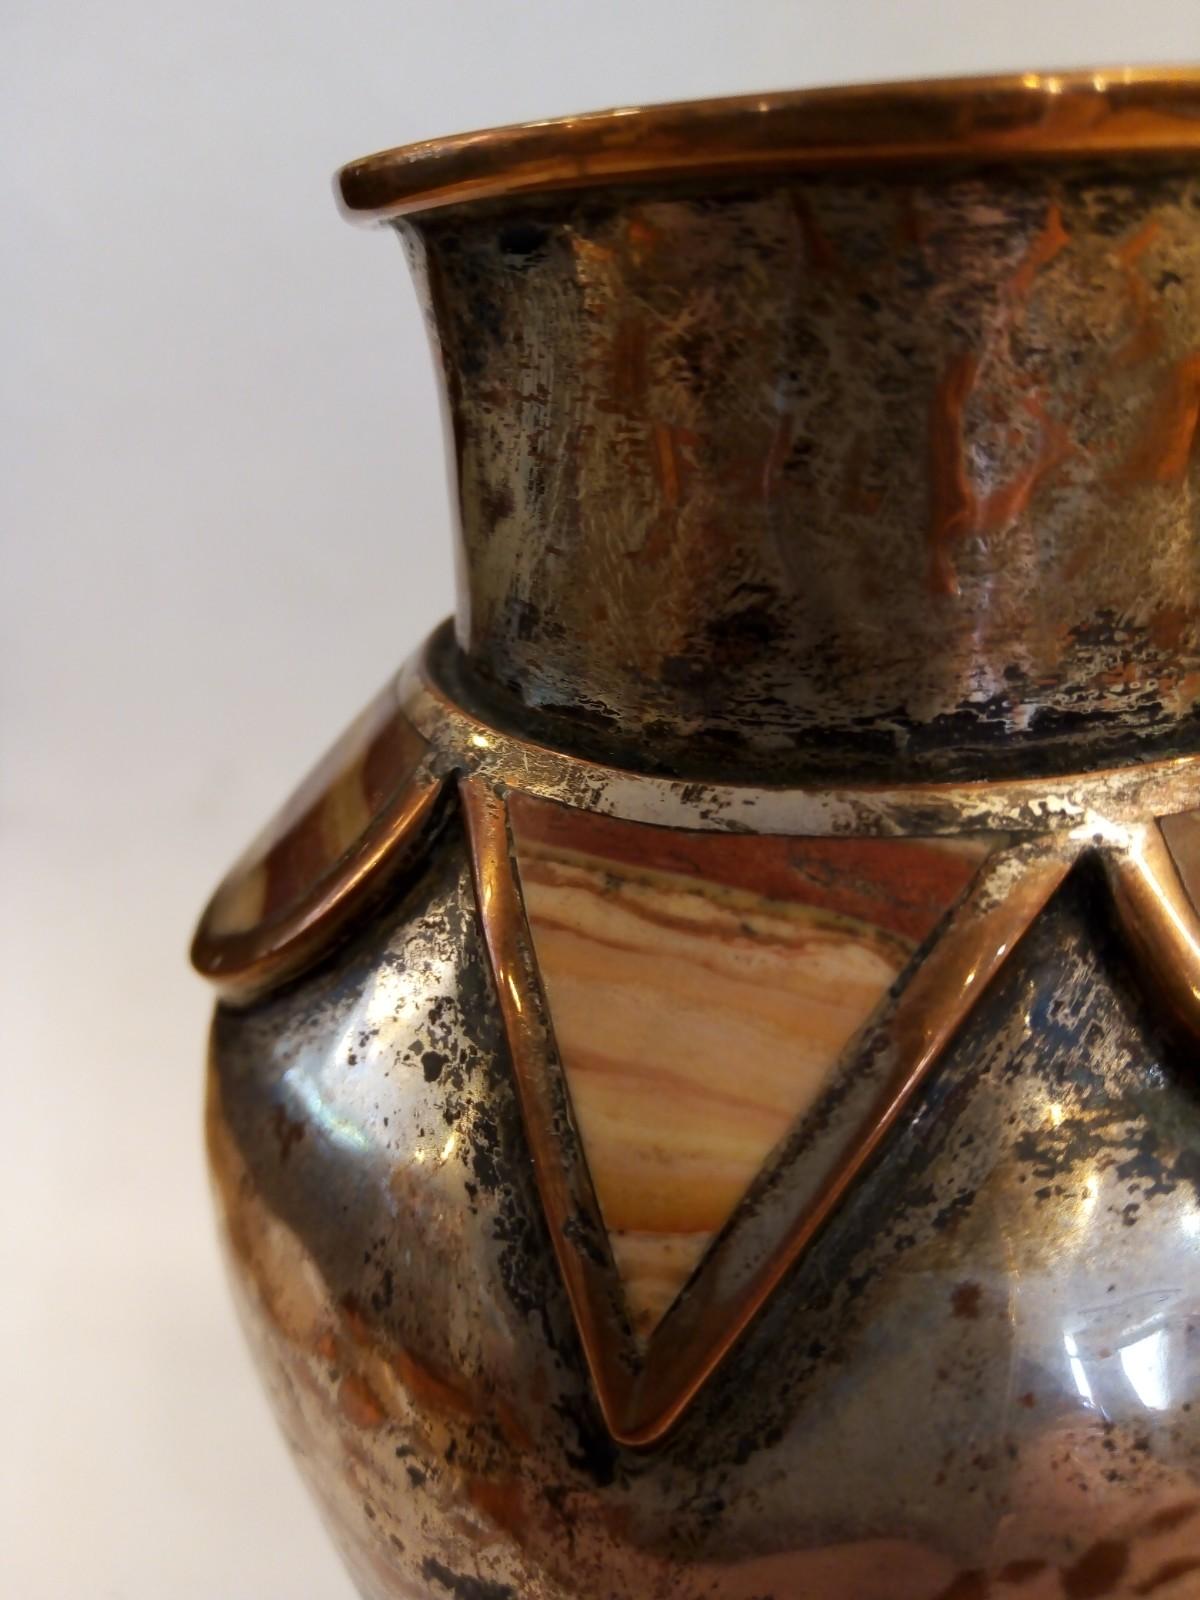 Mexican Special Vase in Plated Hammered Copper and Onyx Inlays by Emilia Castillo Taxco